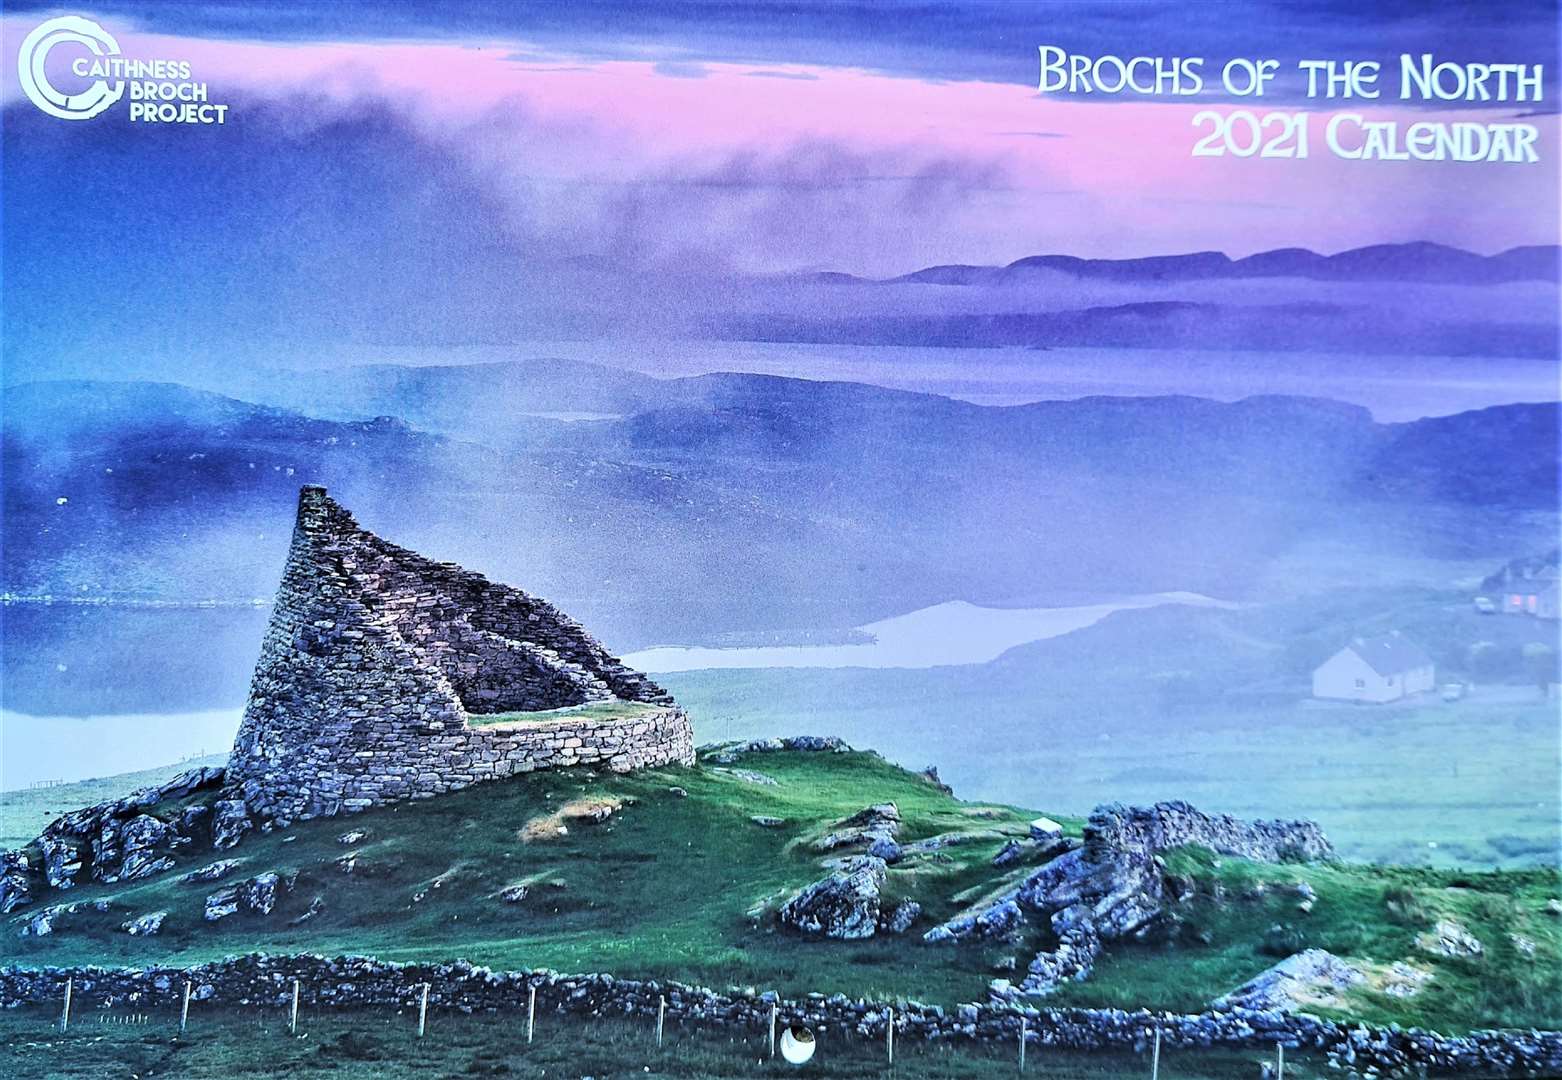 The cover of the calendar produced by Caithness Broch Project shows Dun Carloway in the Western Isles. Picture: Jim Richardson/National Geographic.